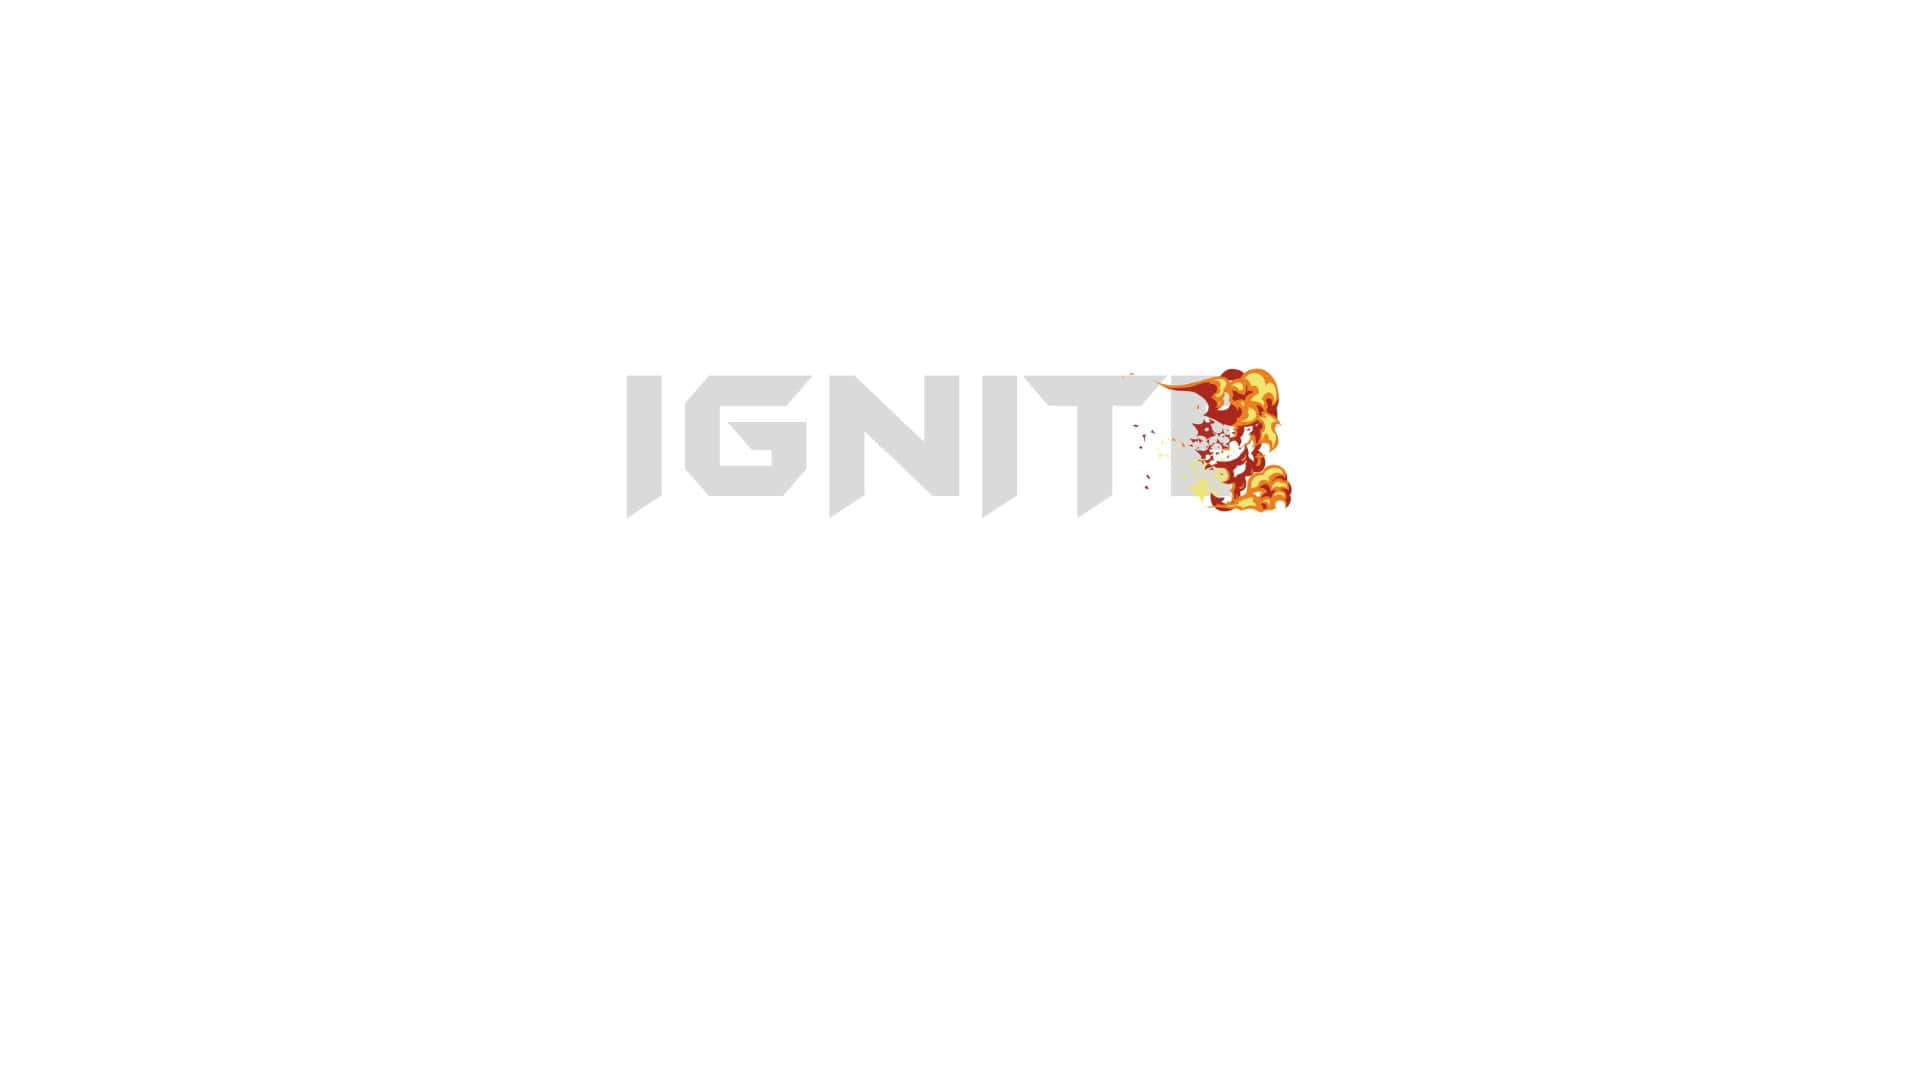 Ignite Logowith Flame Graphic Wallpaper